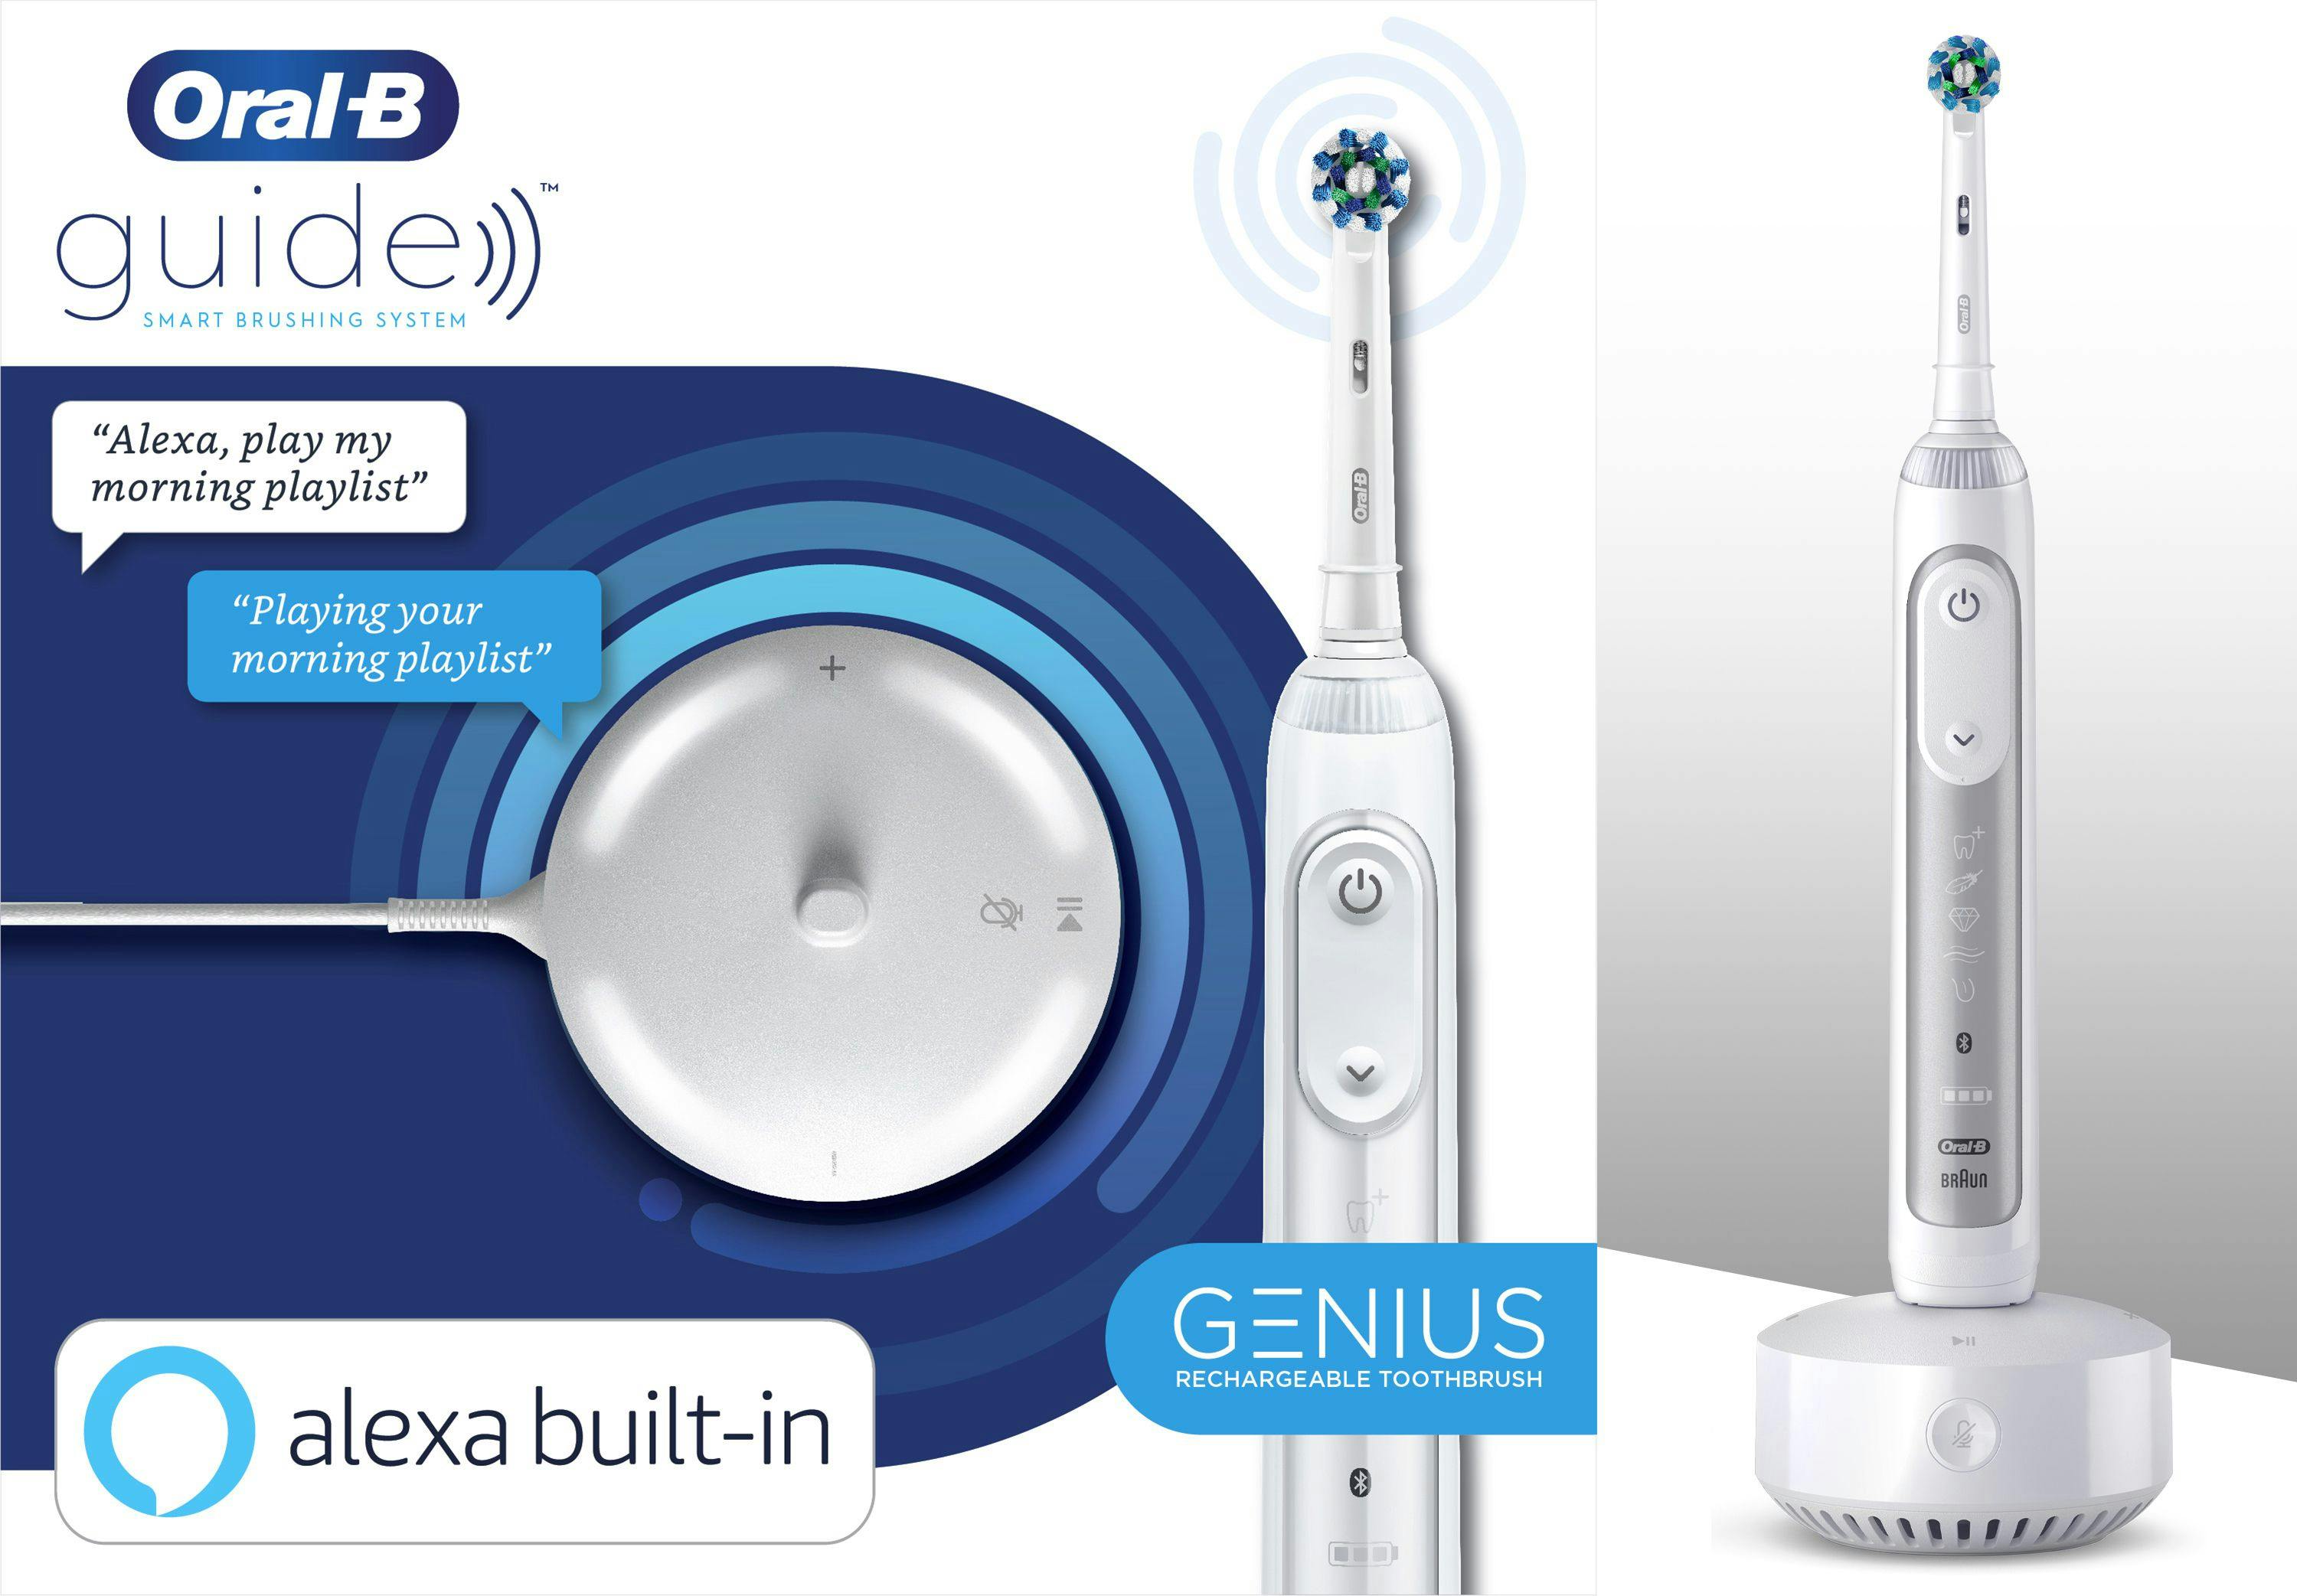 The new Oral-B Guide features Amazon Alexa Built-in Powers.